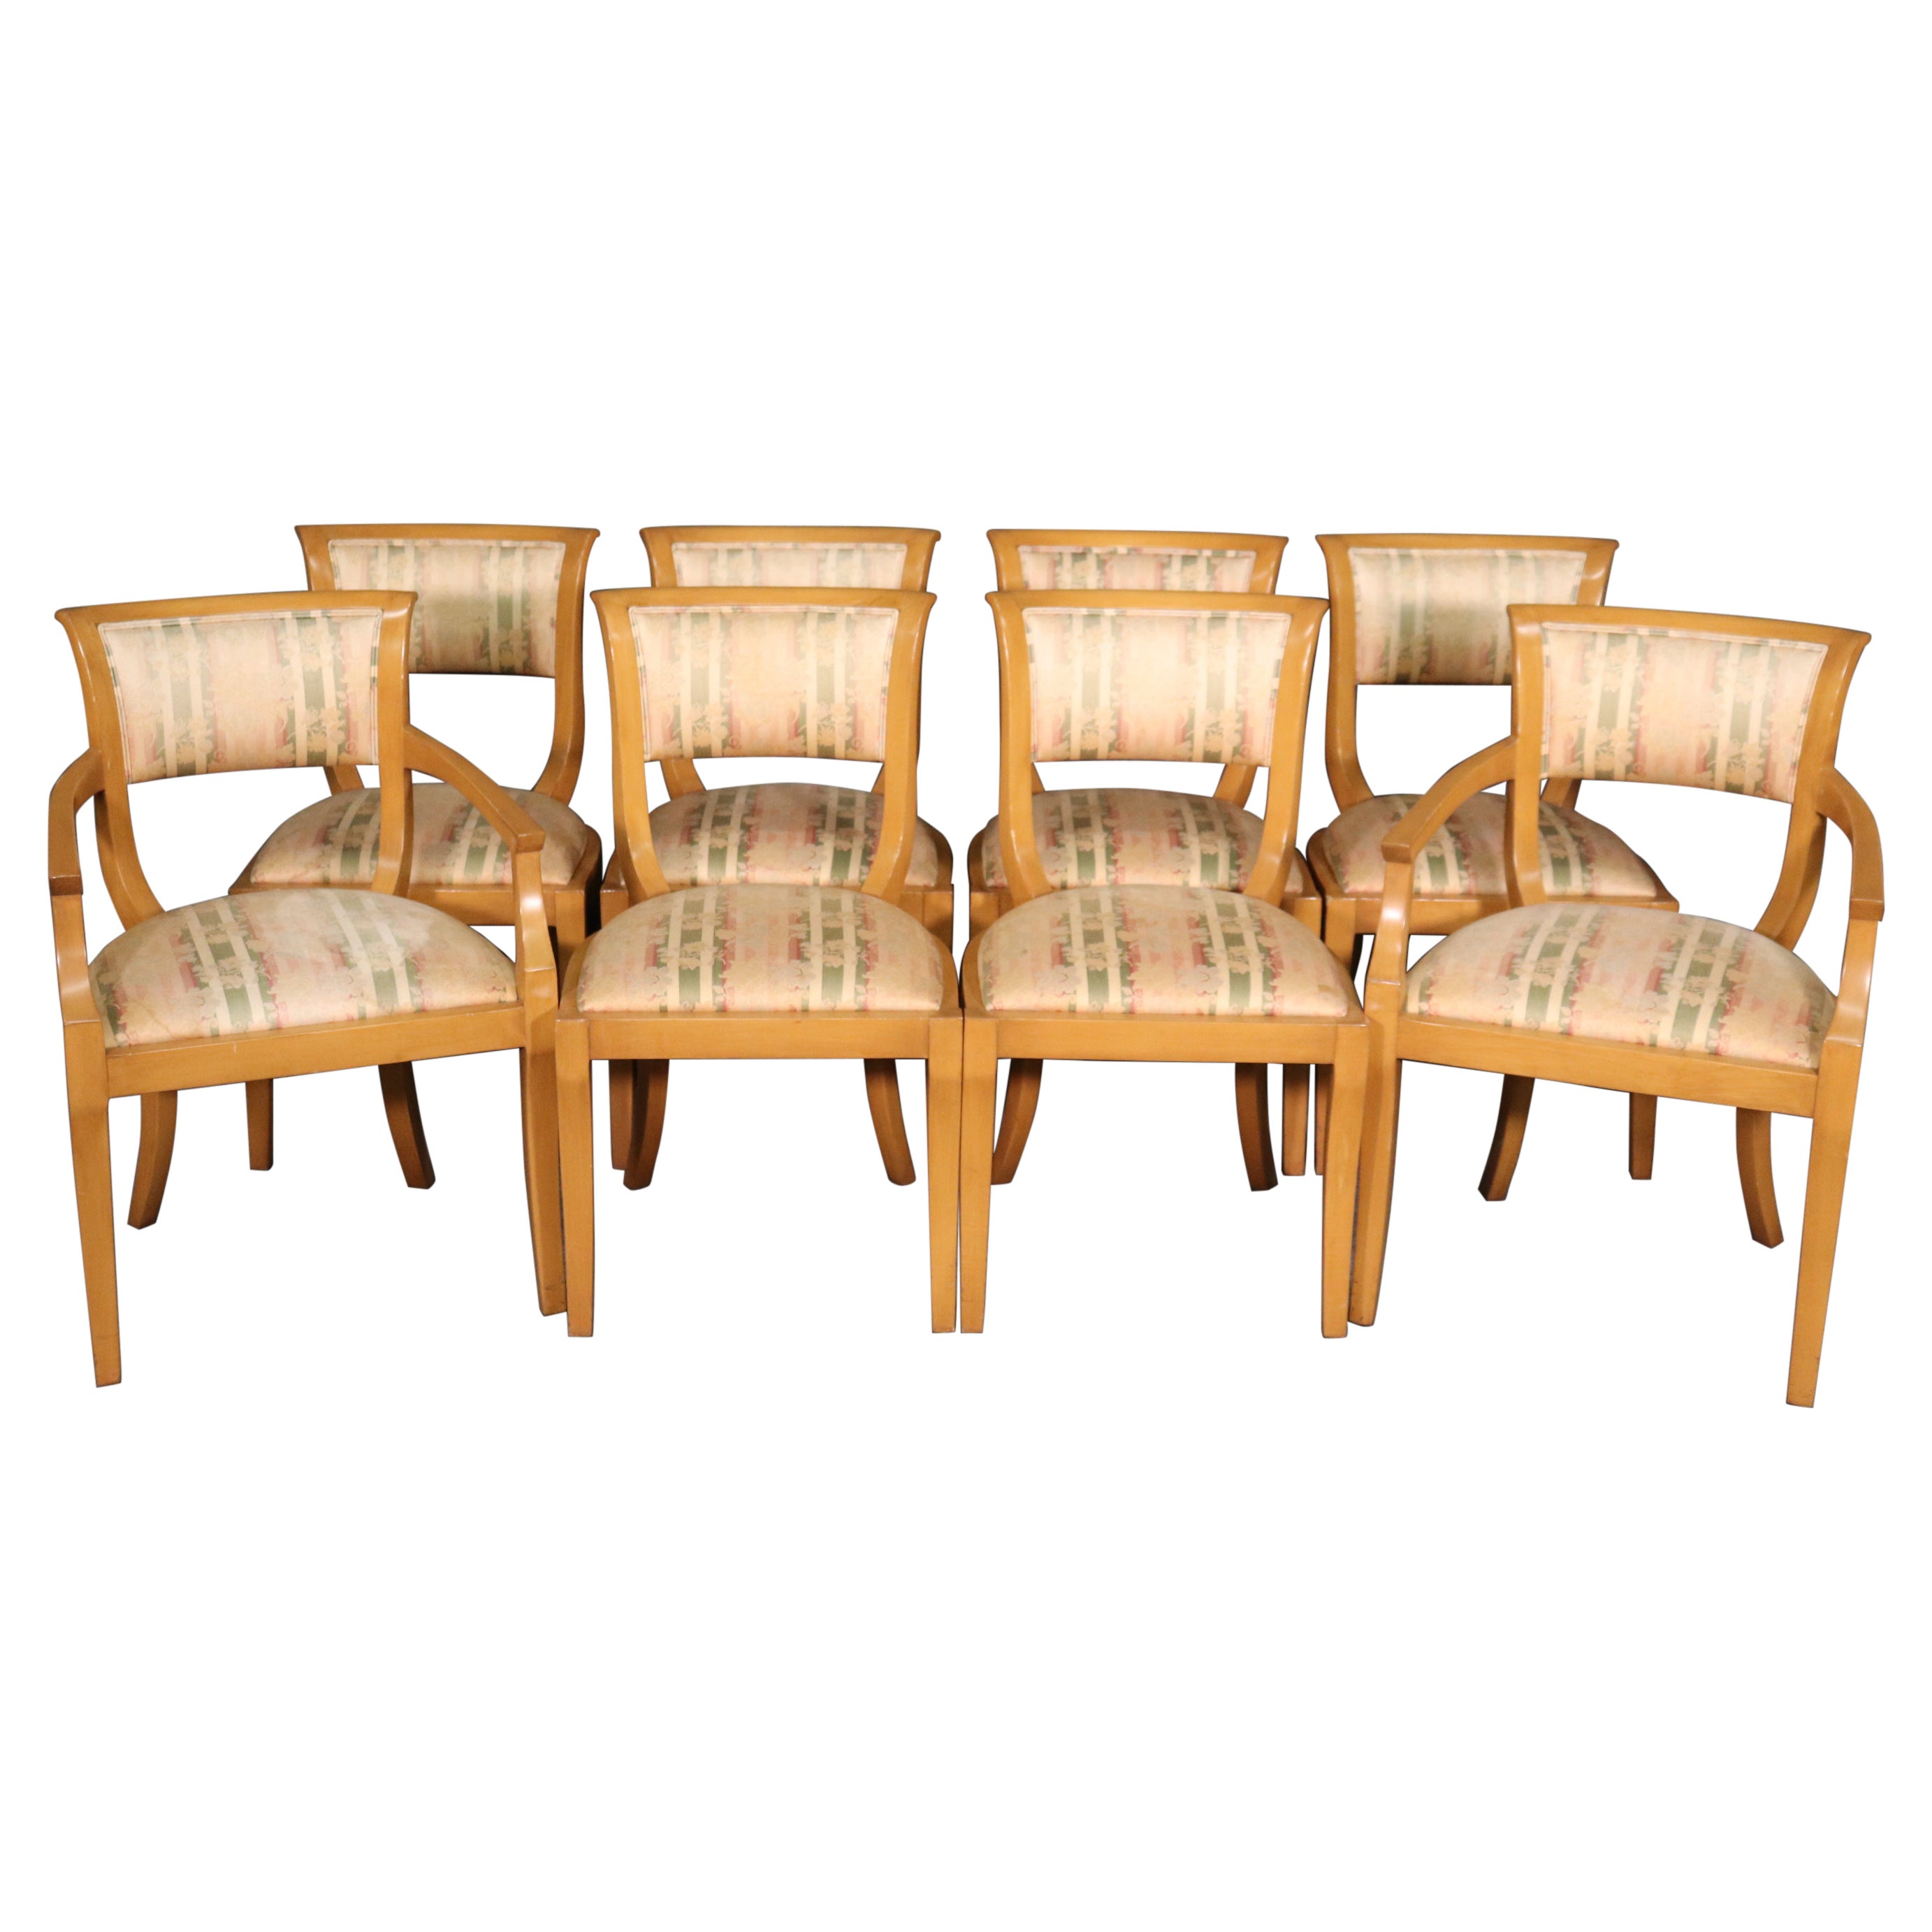 Set of 8 Blonde Mid-Century Modern Hollywood Regency Dining Chairs C1950s For Sale